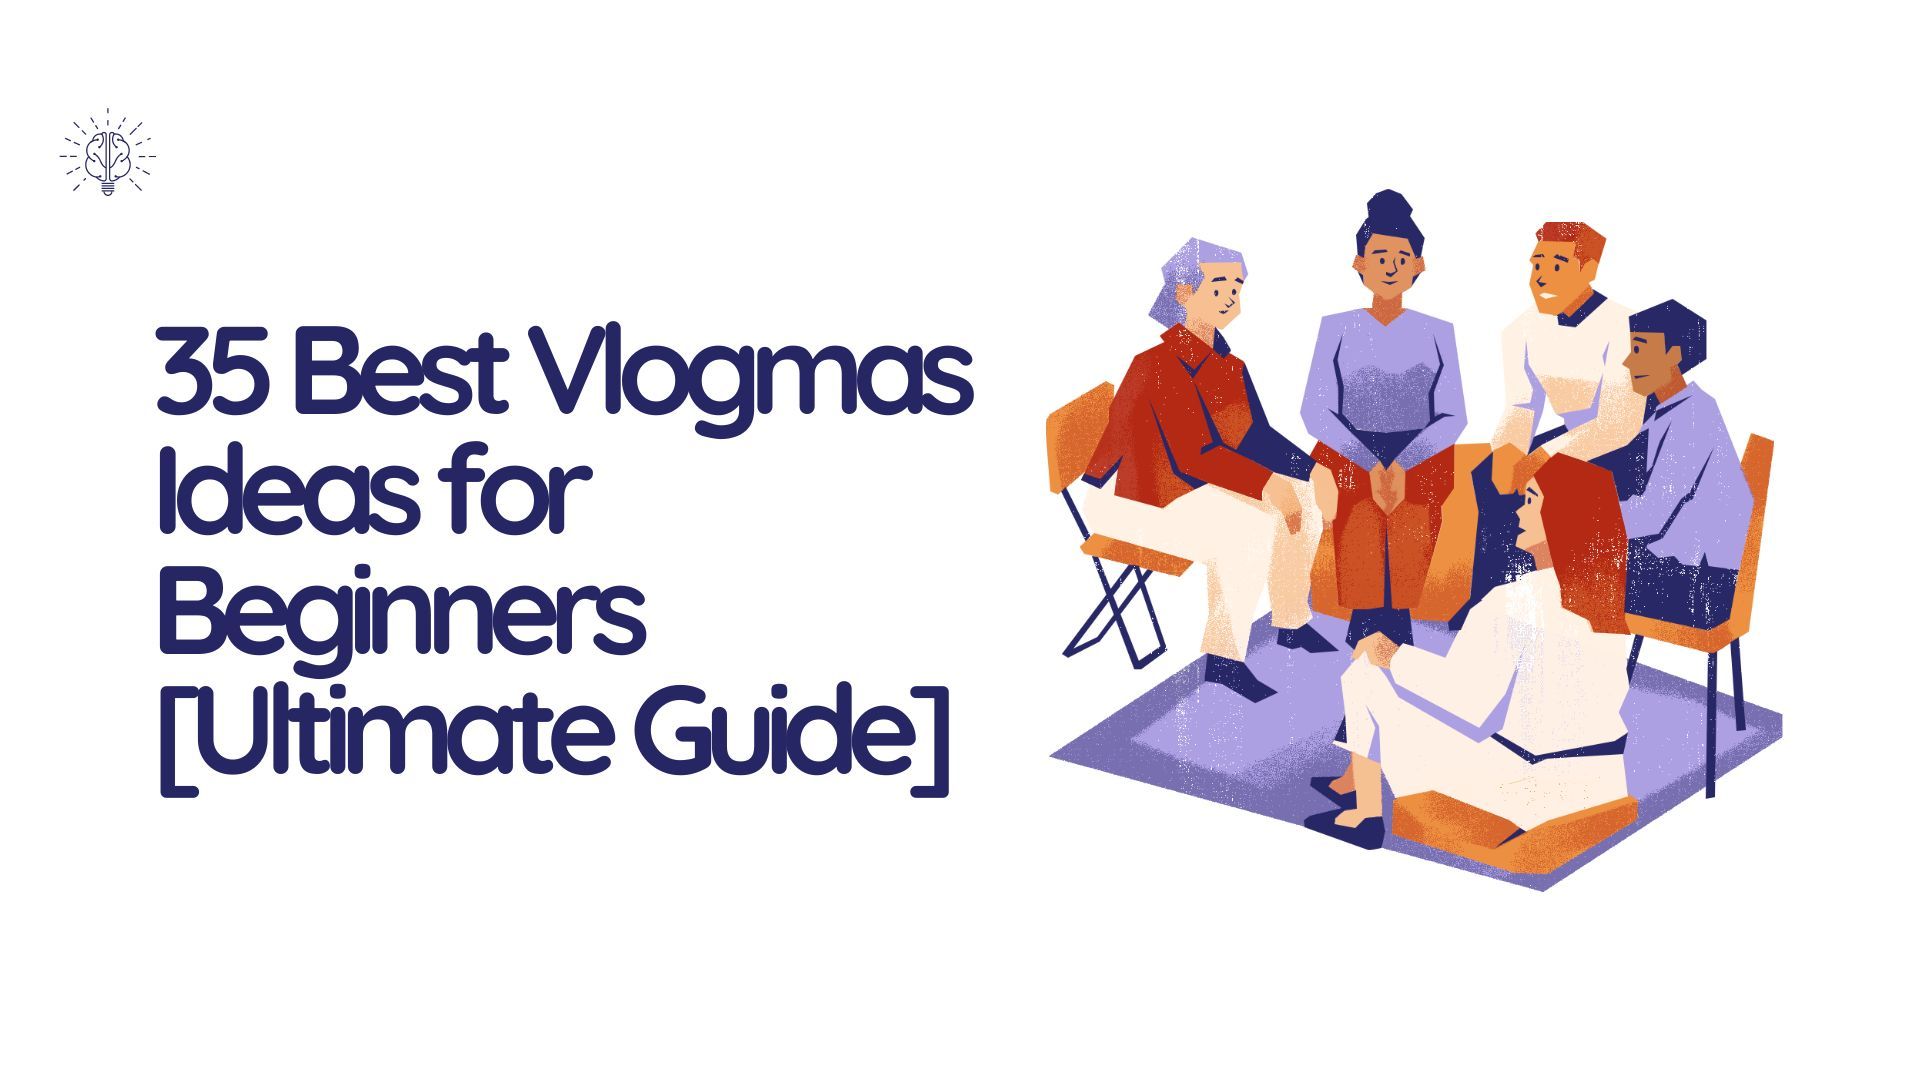 35 Best Vlogmas Ideas for Beginners [Ultimate Guide]